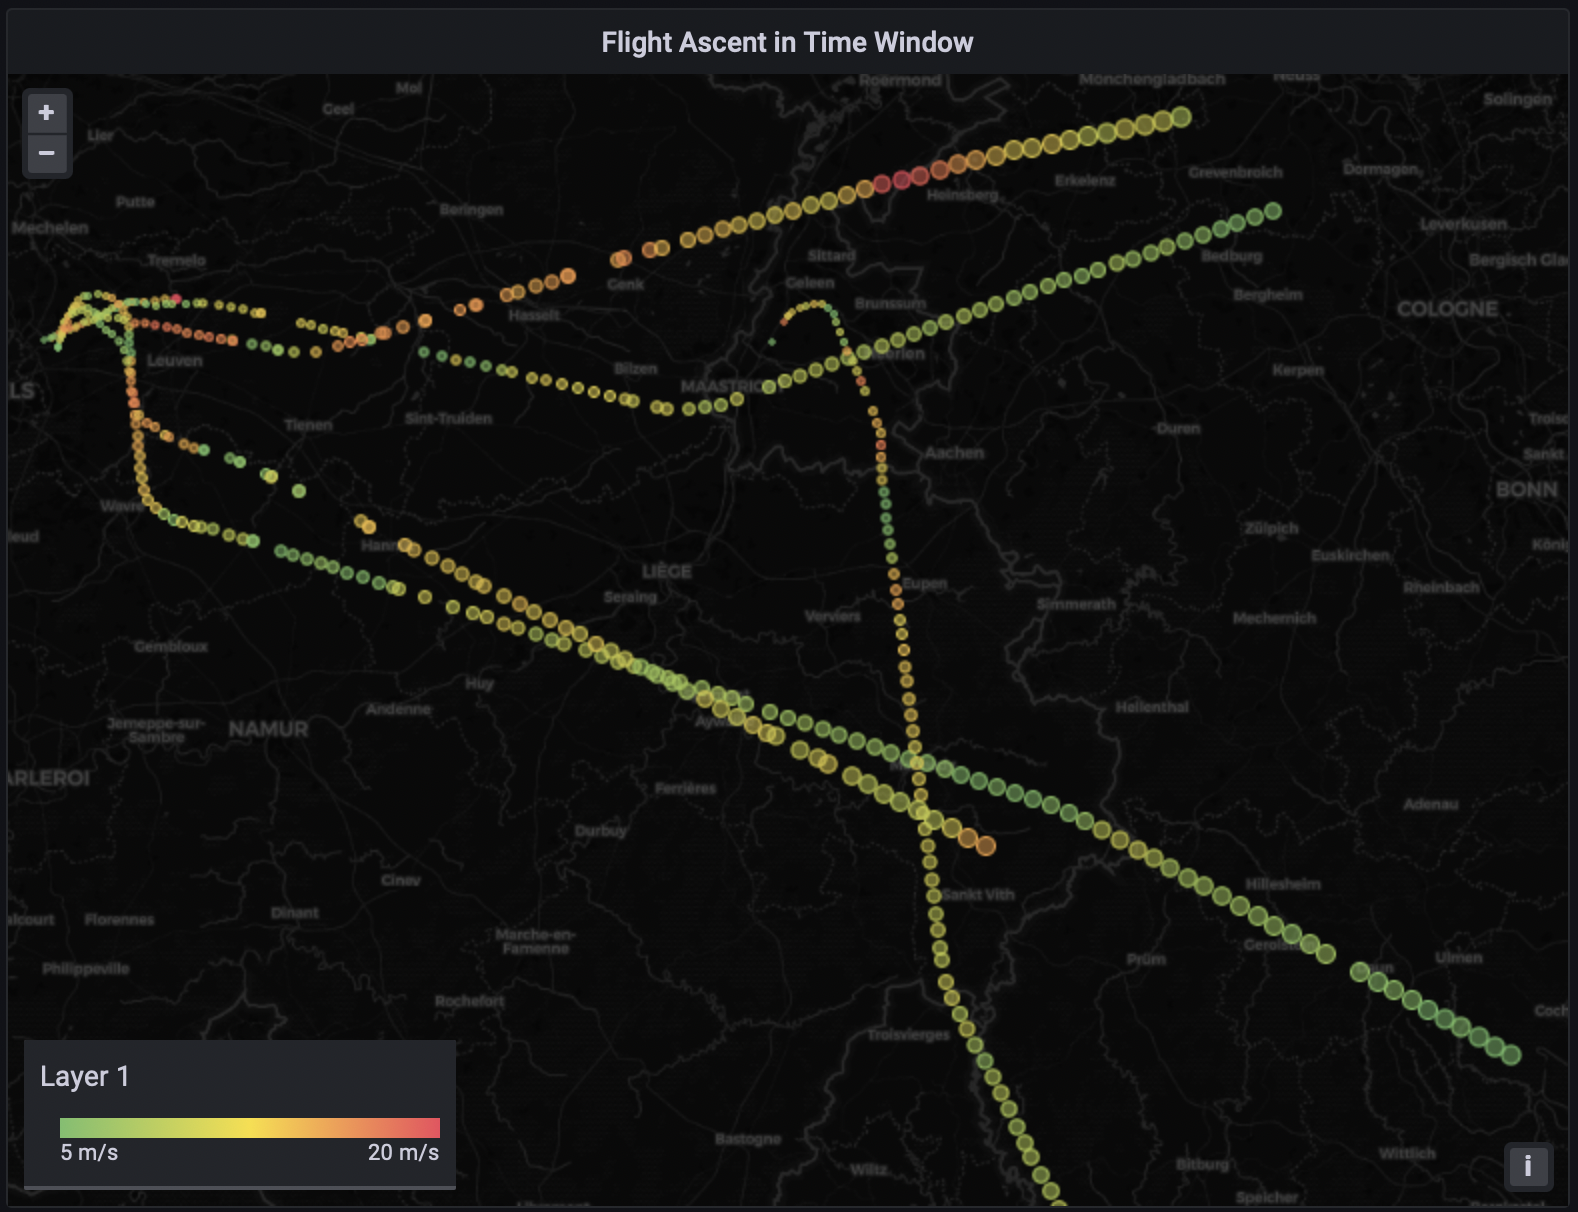 Final visualization with multiple flight ascents